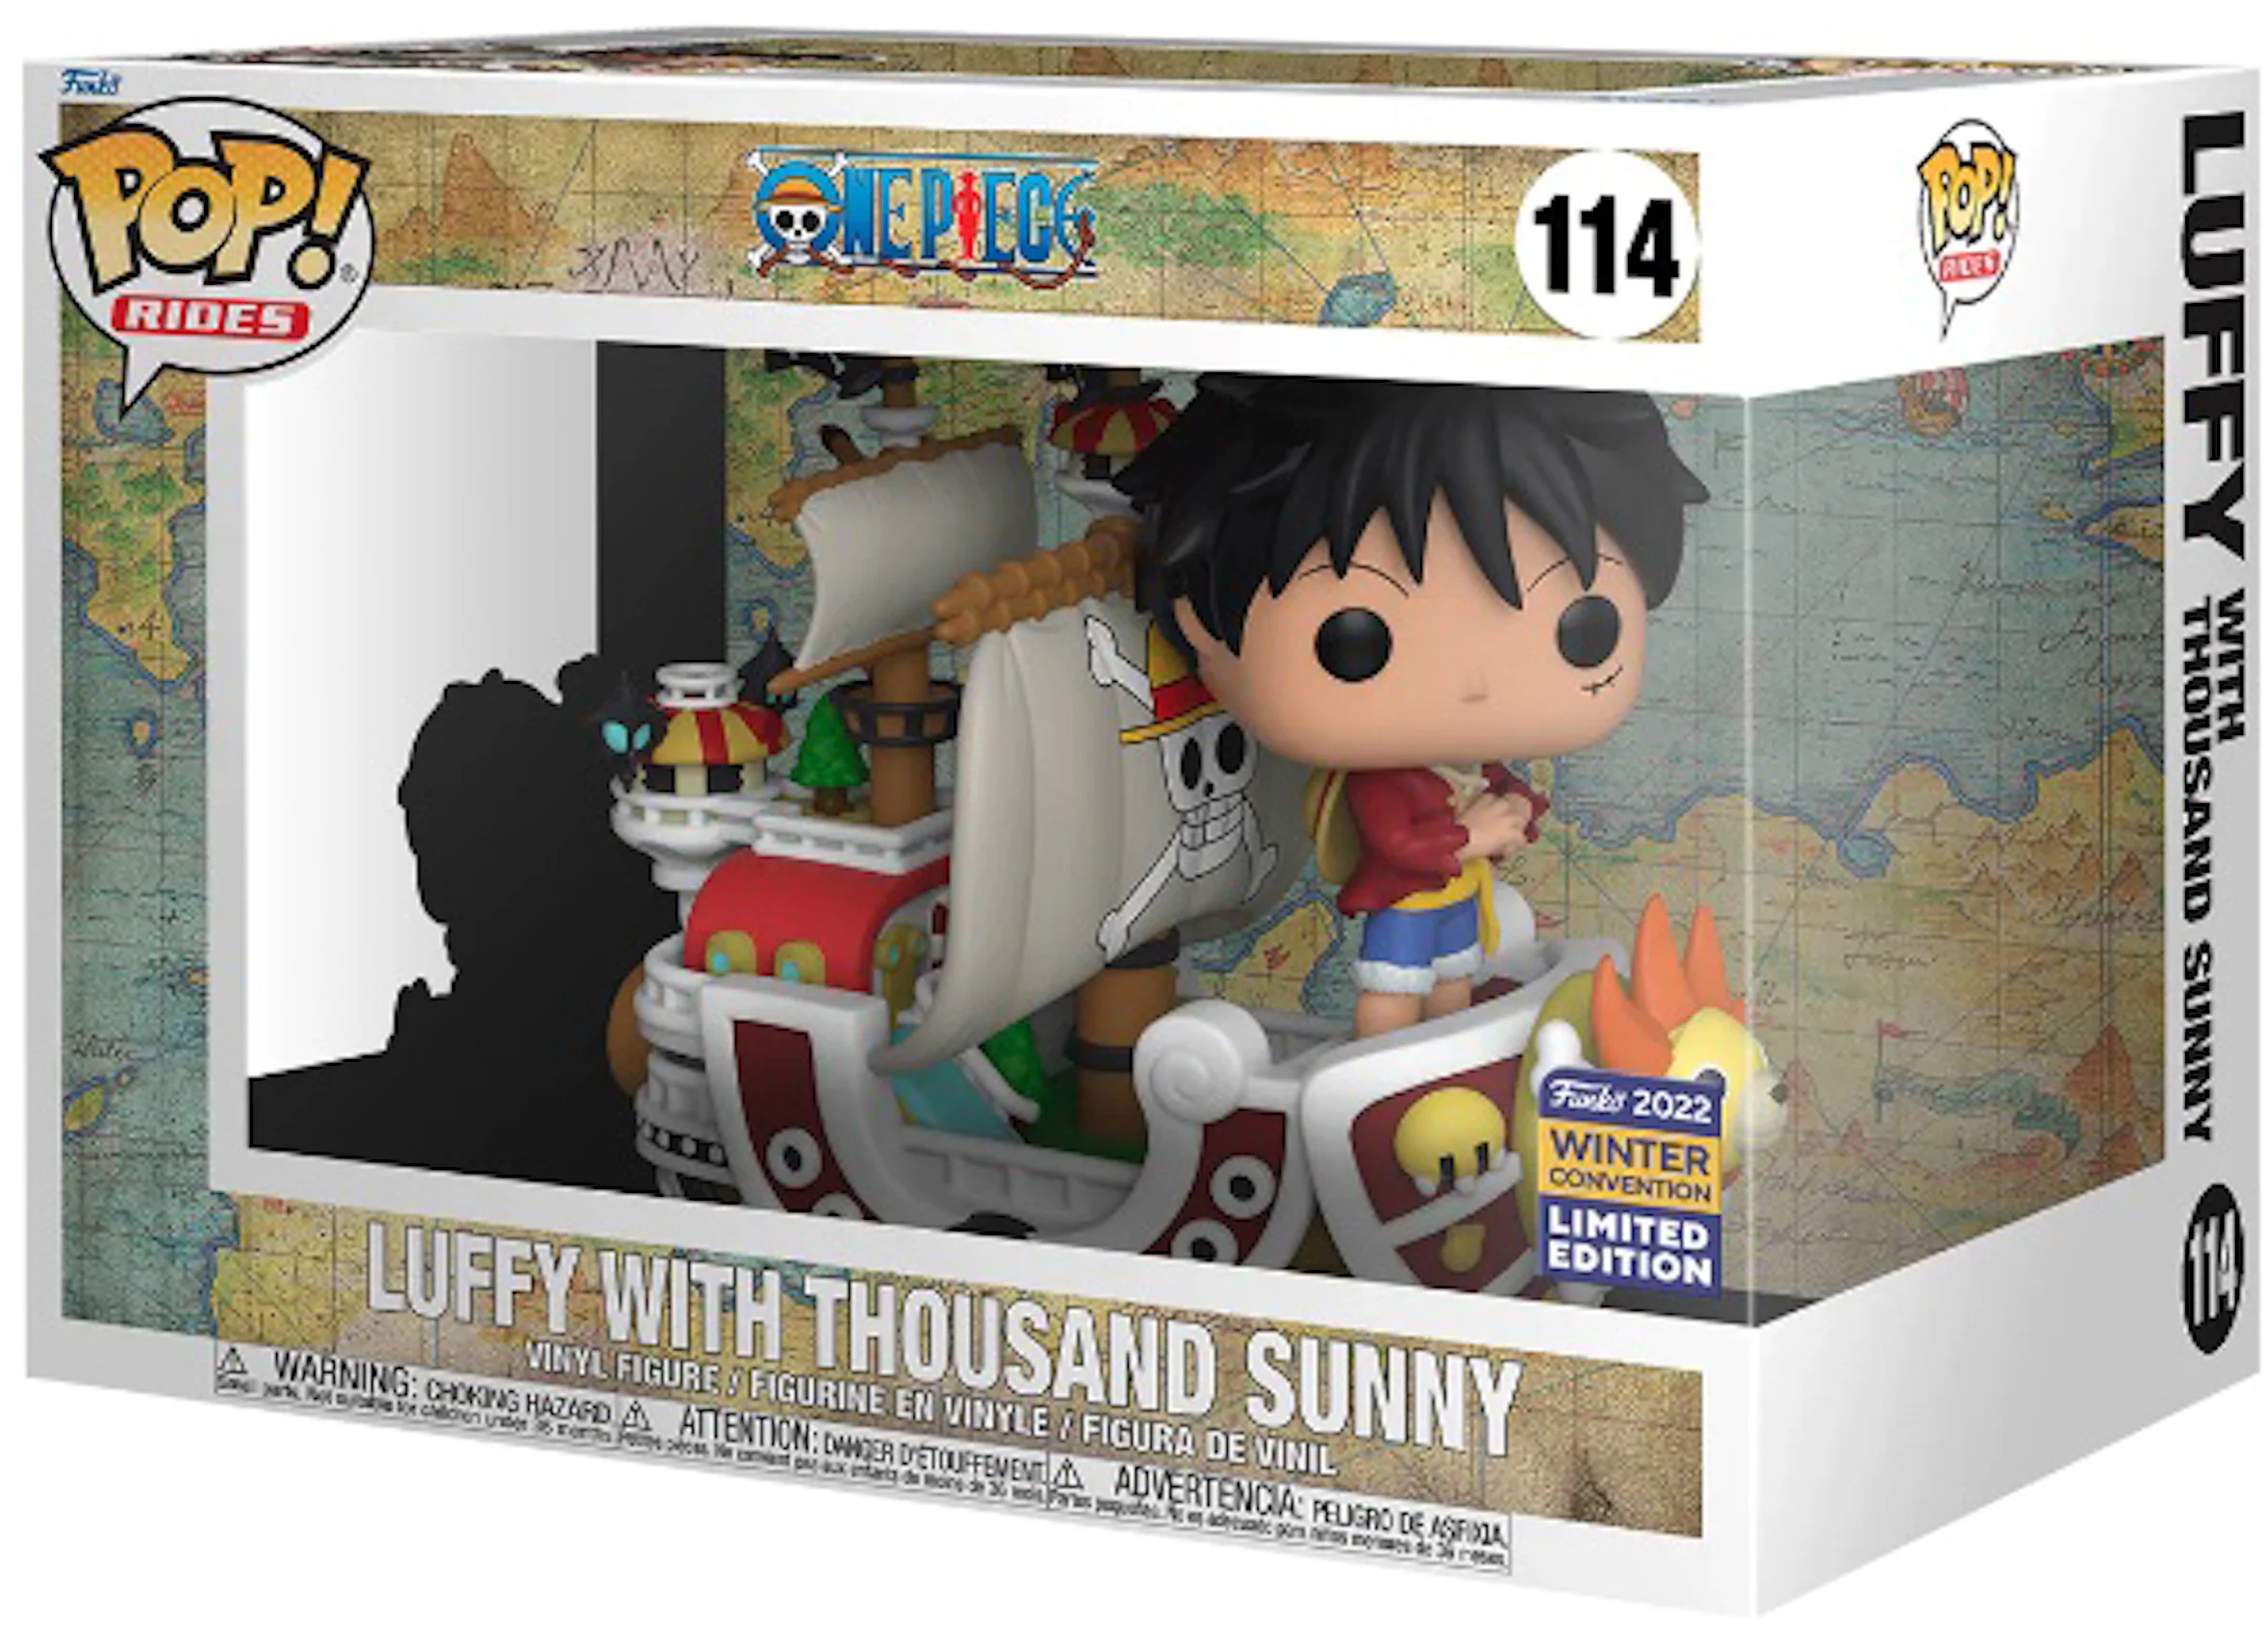 Funko Pop! Rides One Piece Luffy with Thousand Sunny 2022